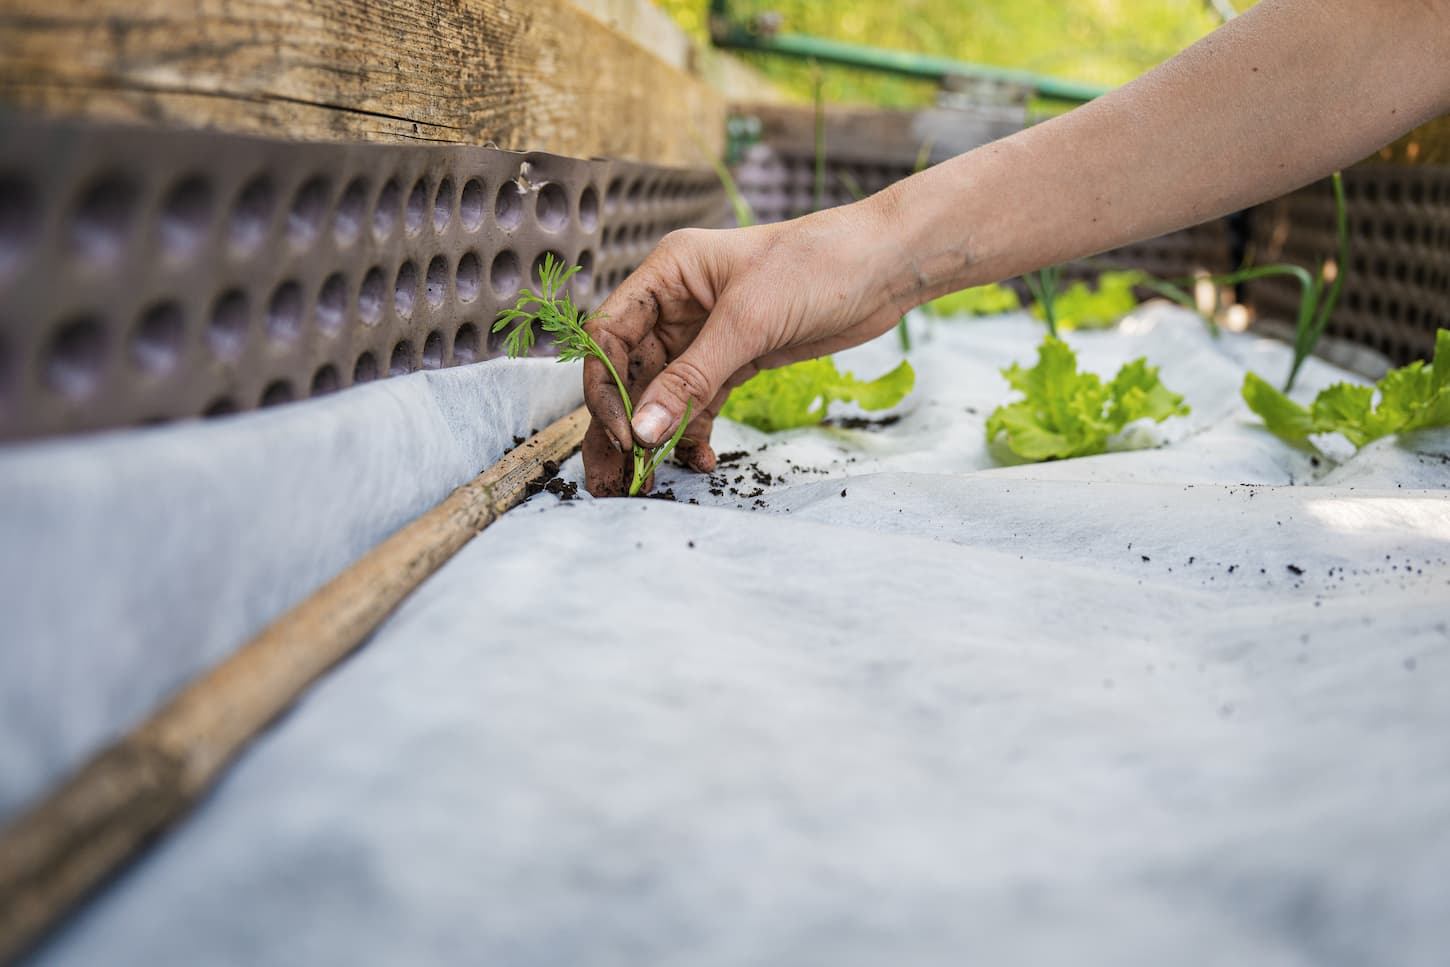 An image of a bare female's hand planting carrot seedling in a vegetable garden protected with a white net.